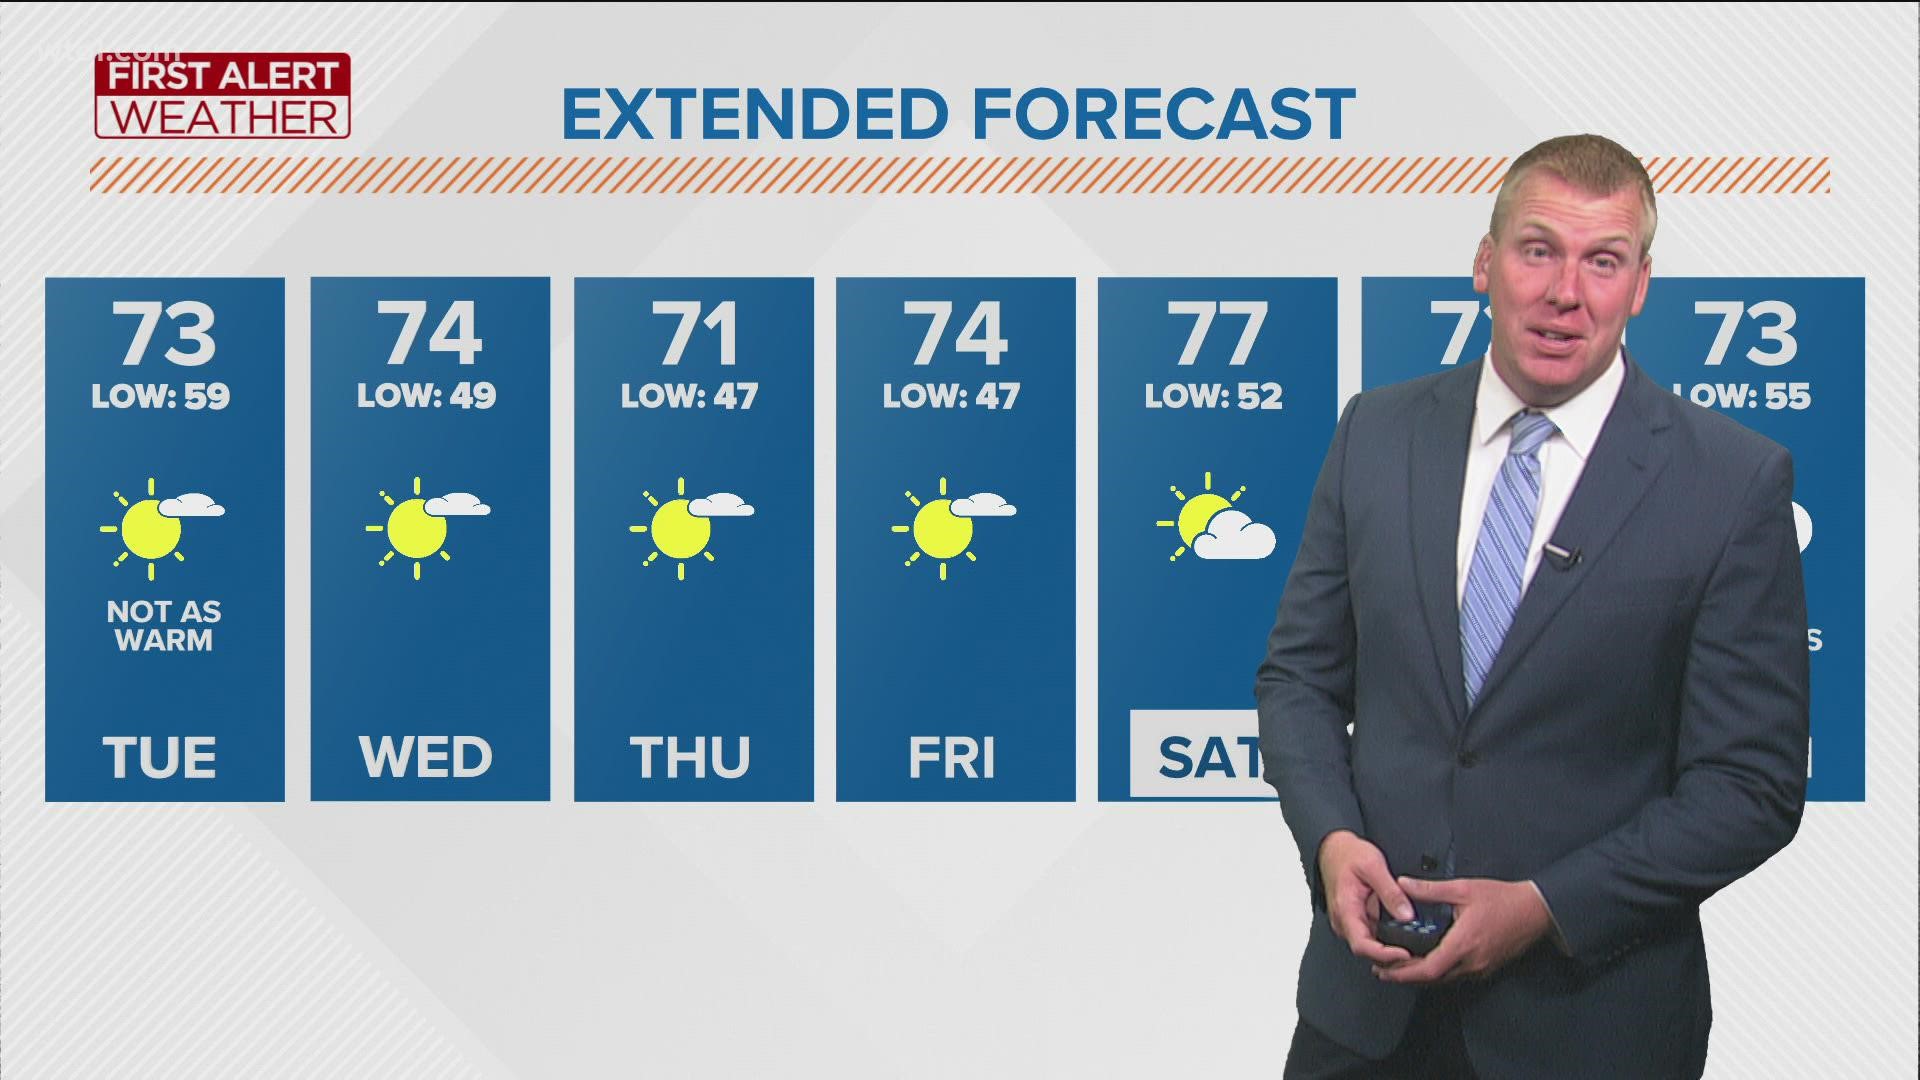 Expect highs in the 70s through the weekend!